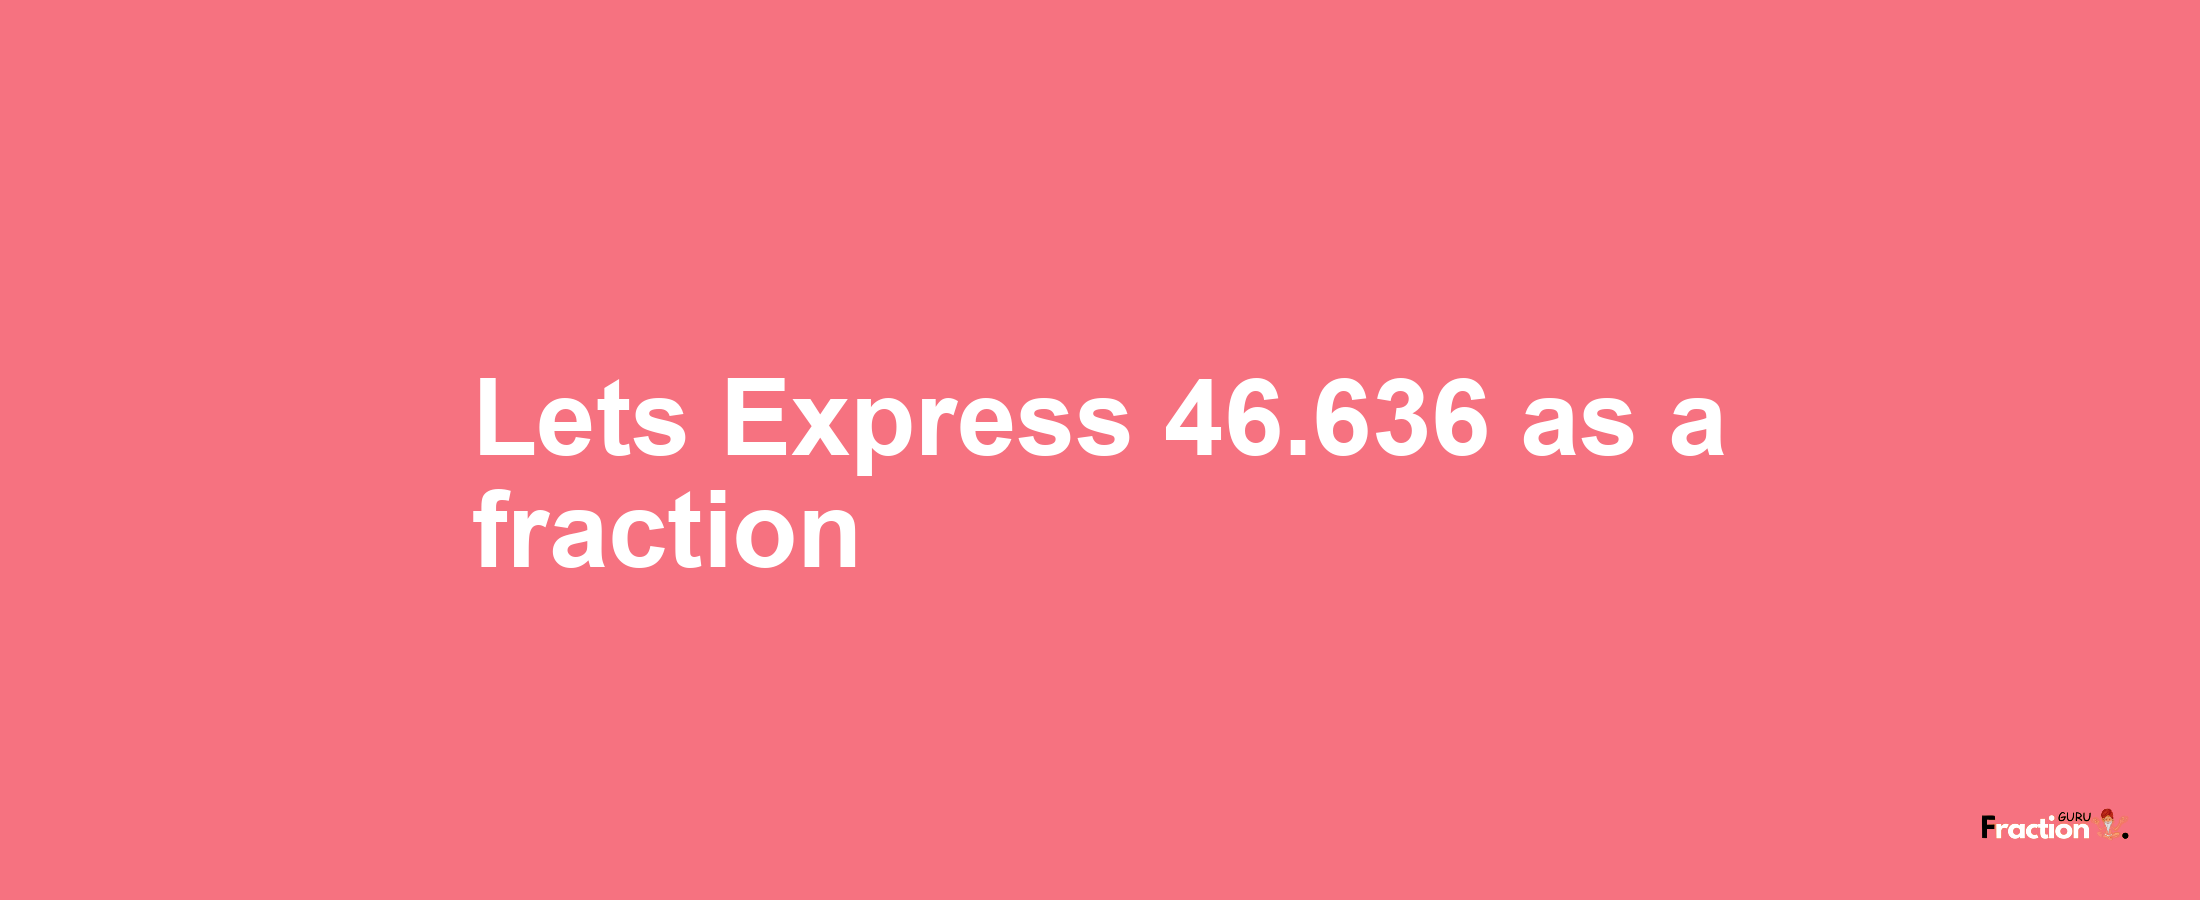 Lets Express 46.636 as afraction